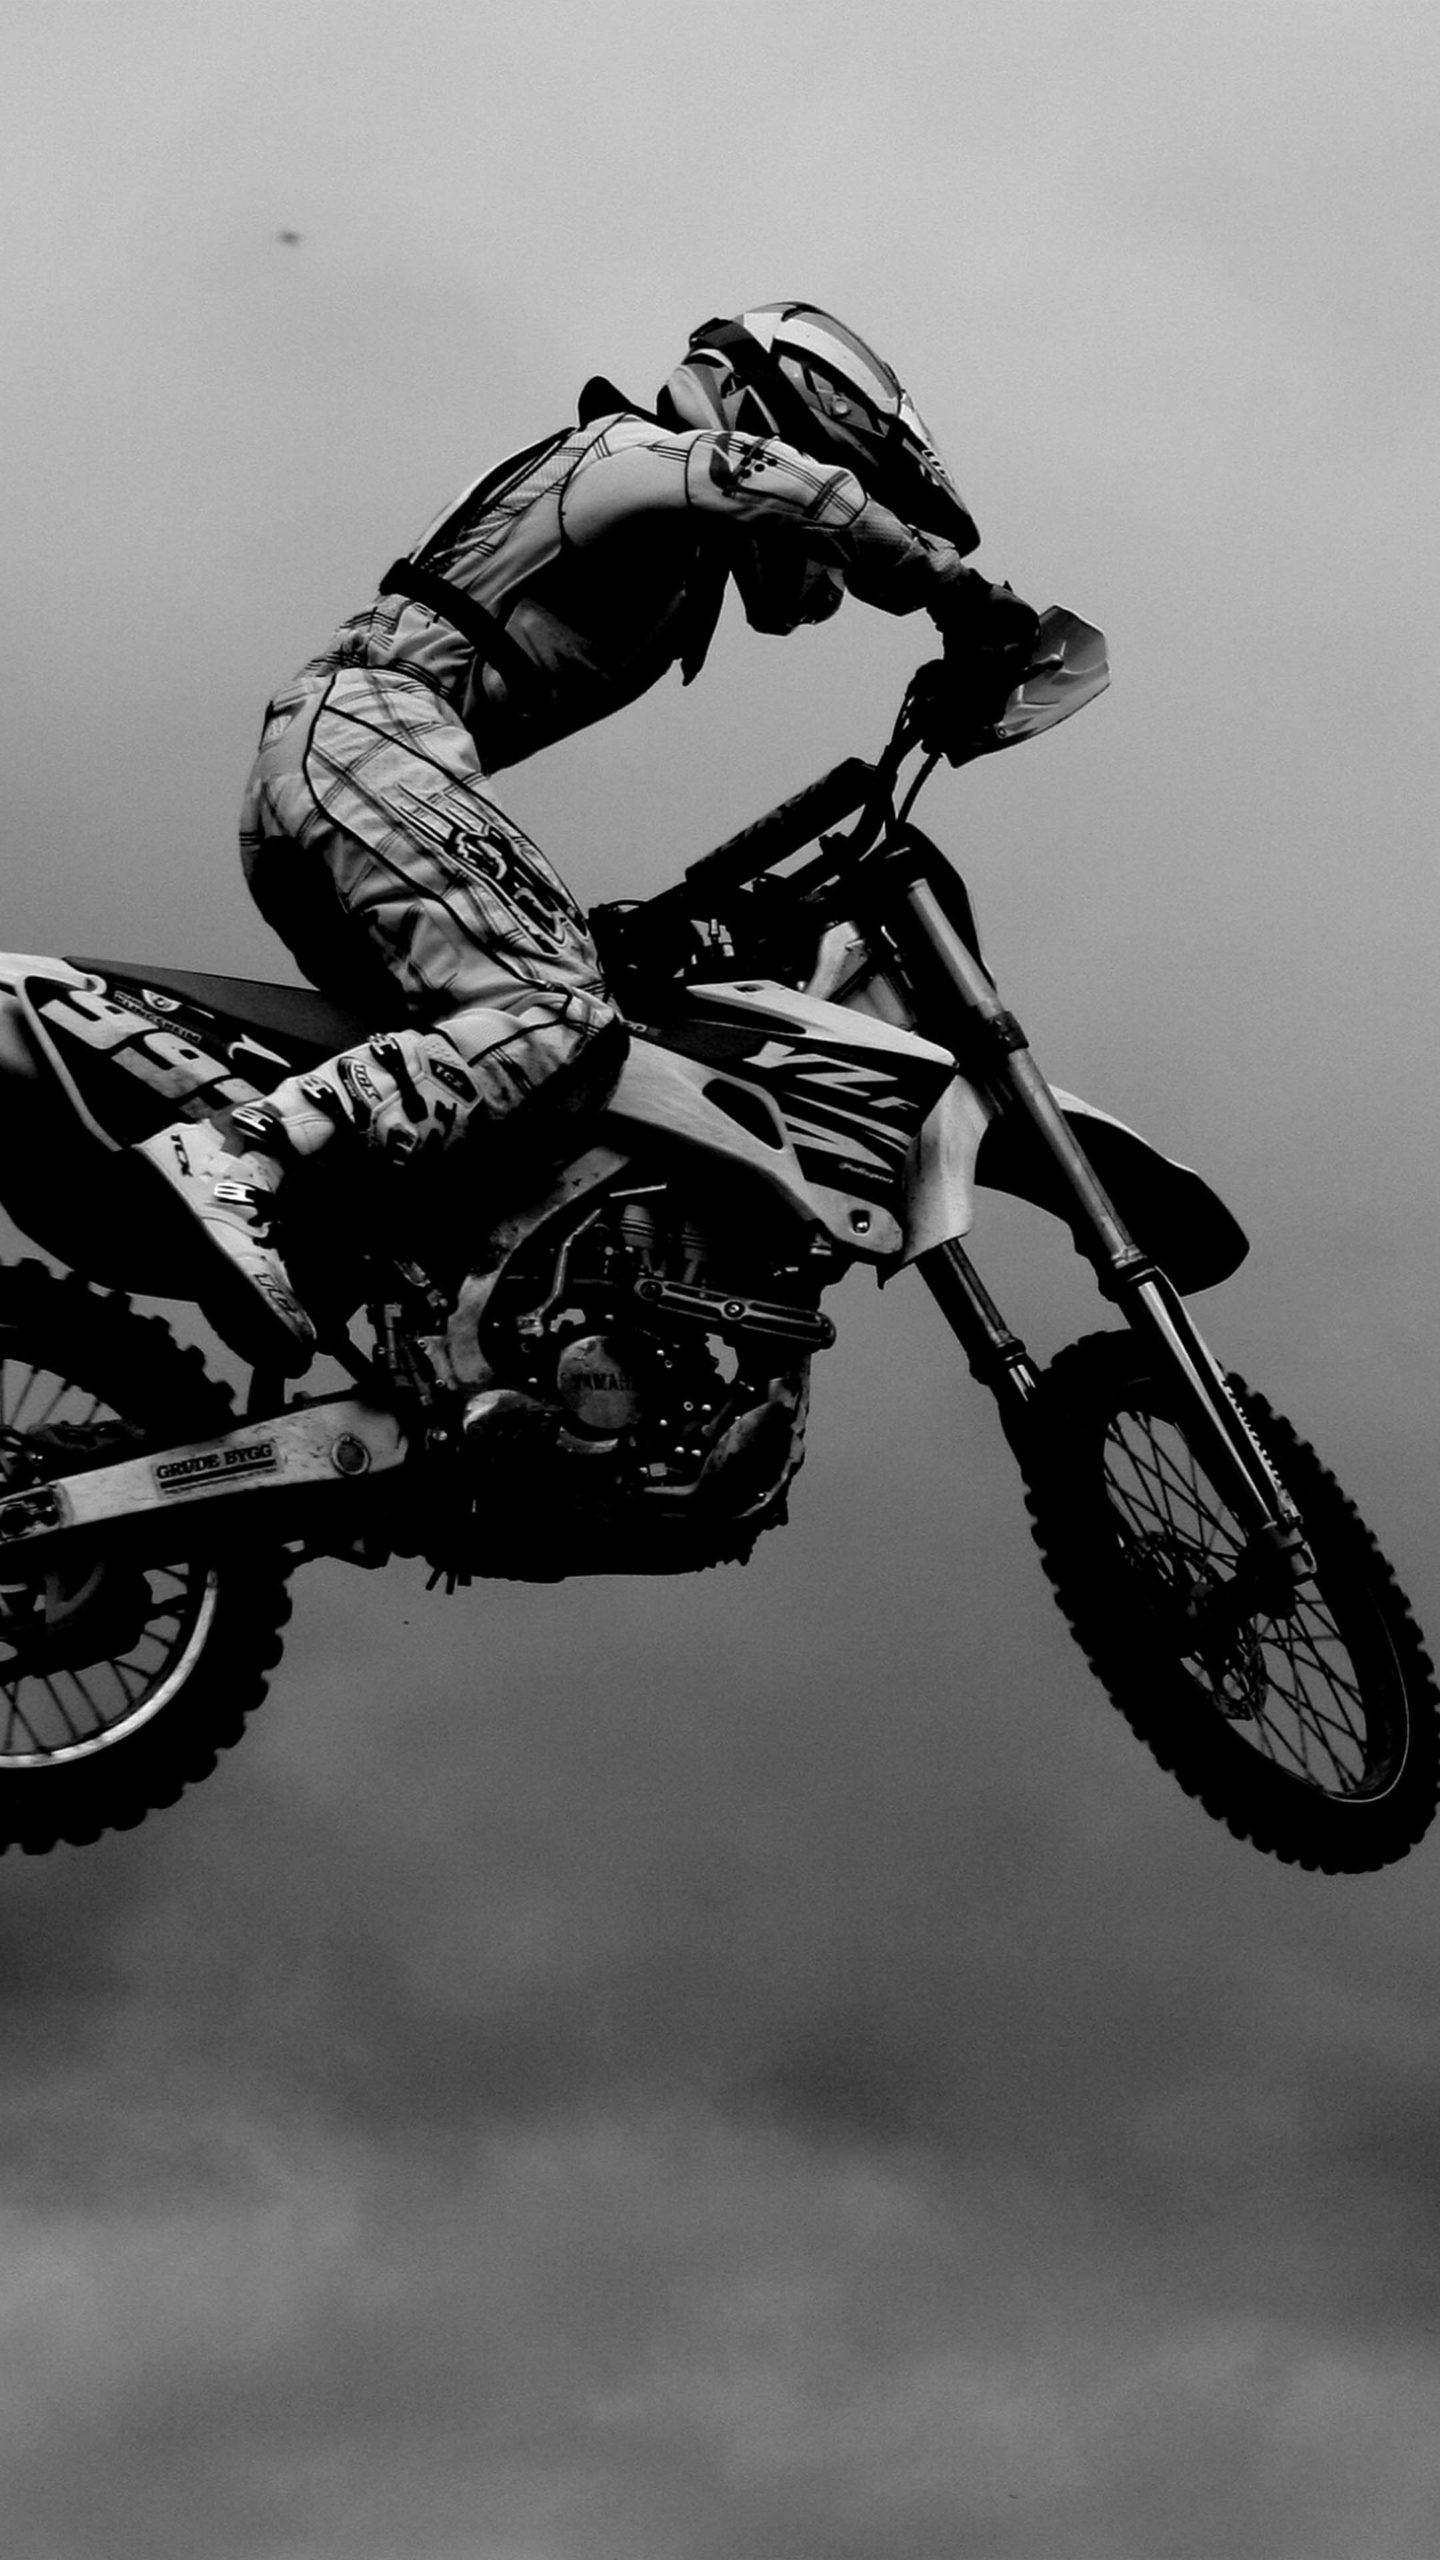 Enduro Motorbike: Black And White, A New Variation Of Supercross, Freestyle Motorcycling, Motocross Bike. 1440x2560 HD Wallpaper.